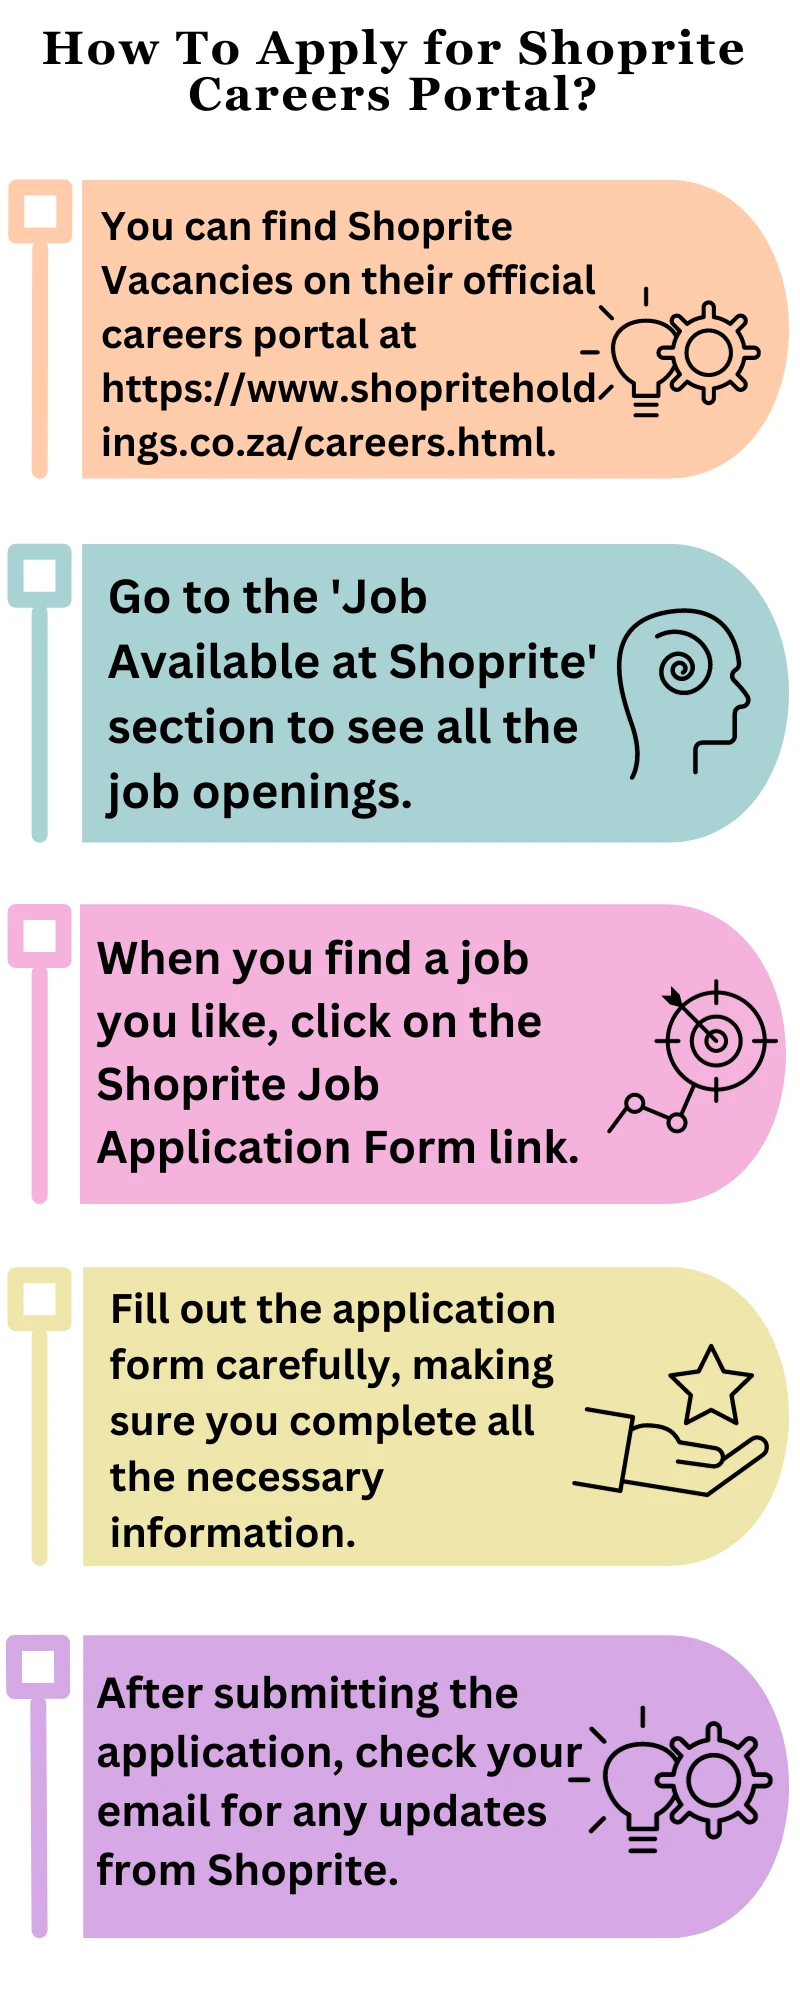 How To Apply for Shoprite Careers Portal?